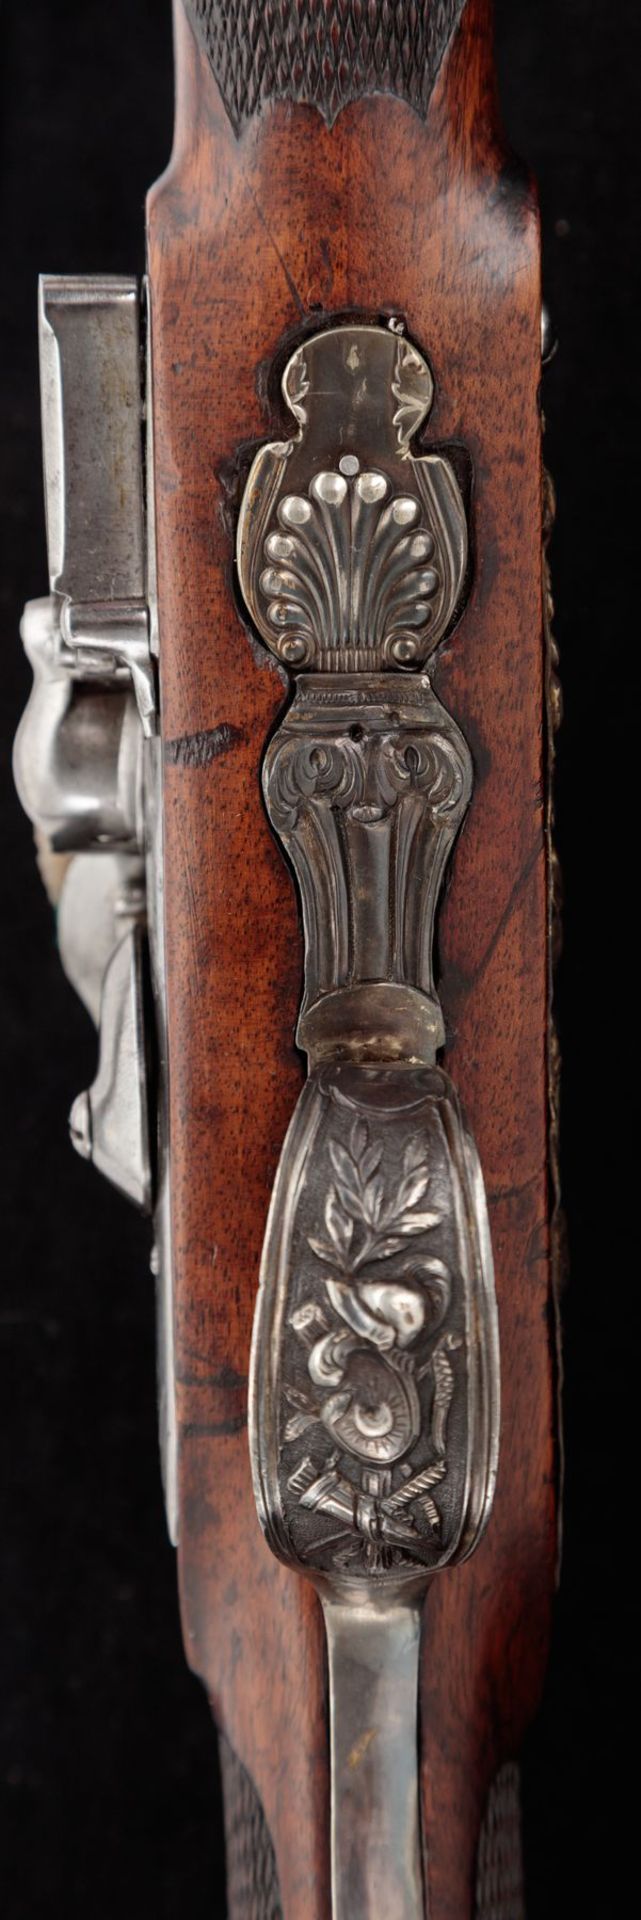 French hunting ri e with a intlock, circa 1800, with a silver instrument. Overall [...] - Bild 10 aus 10